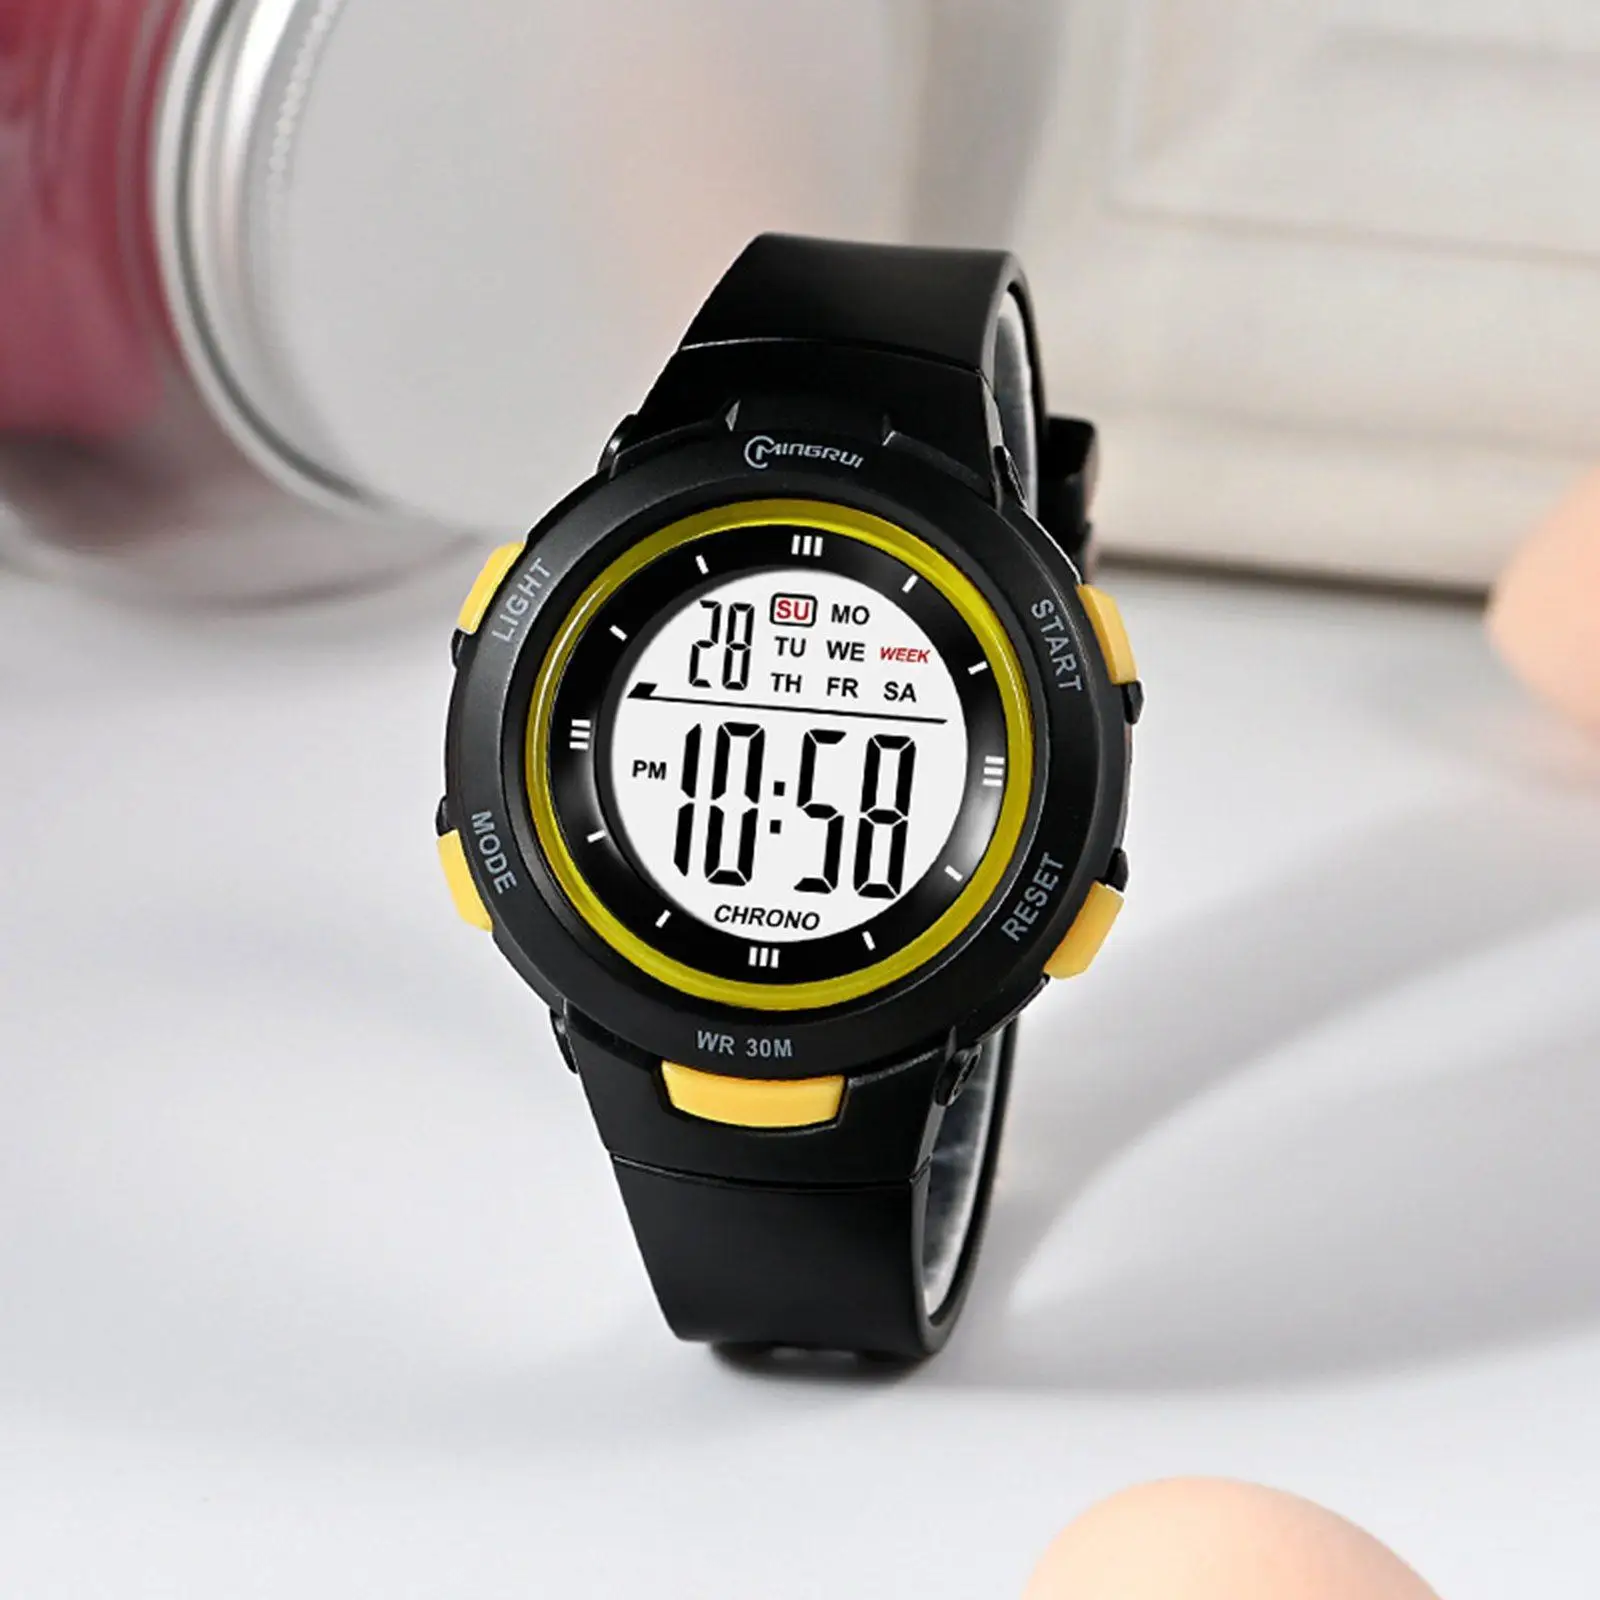 Boys , Outdoor Waterproof Electronic Watches, Wrist Watch with Alarm Stopwatch